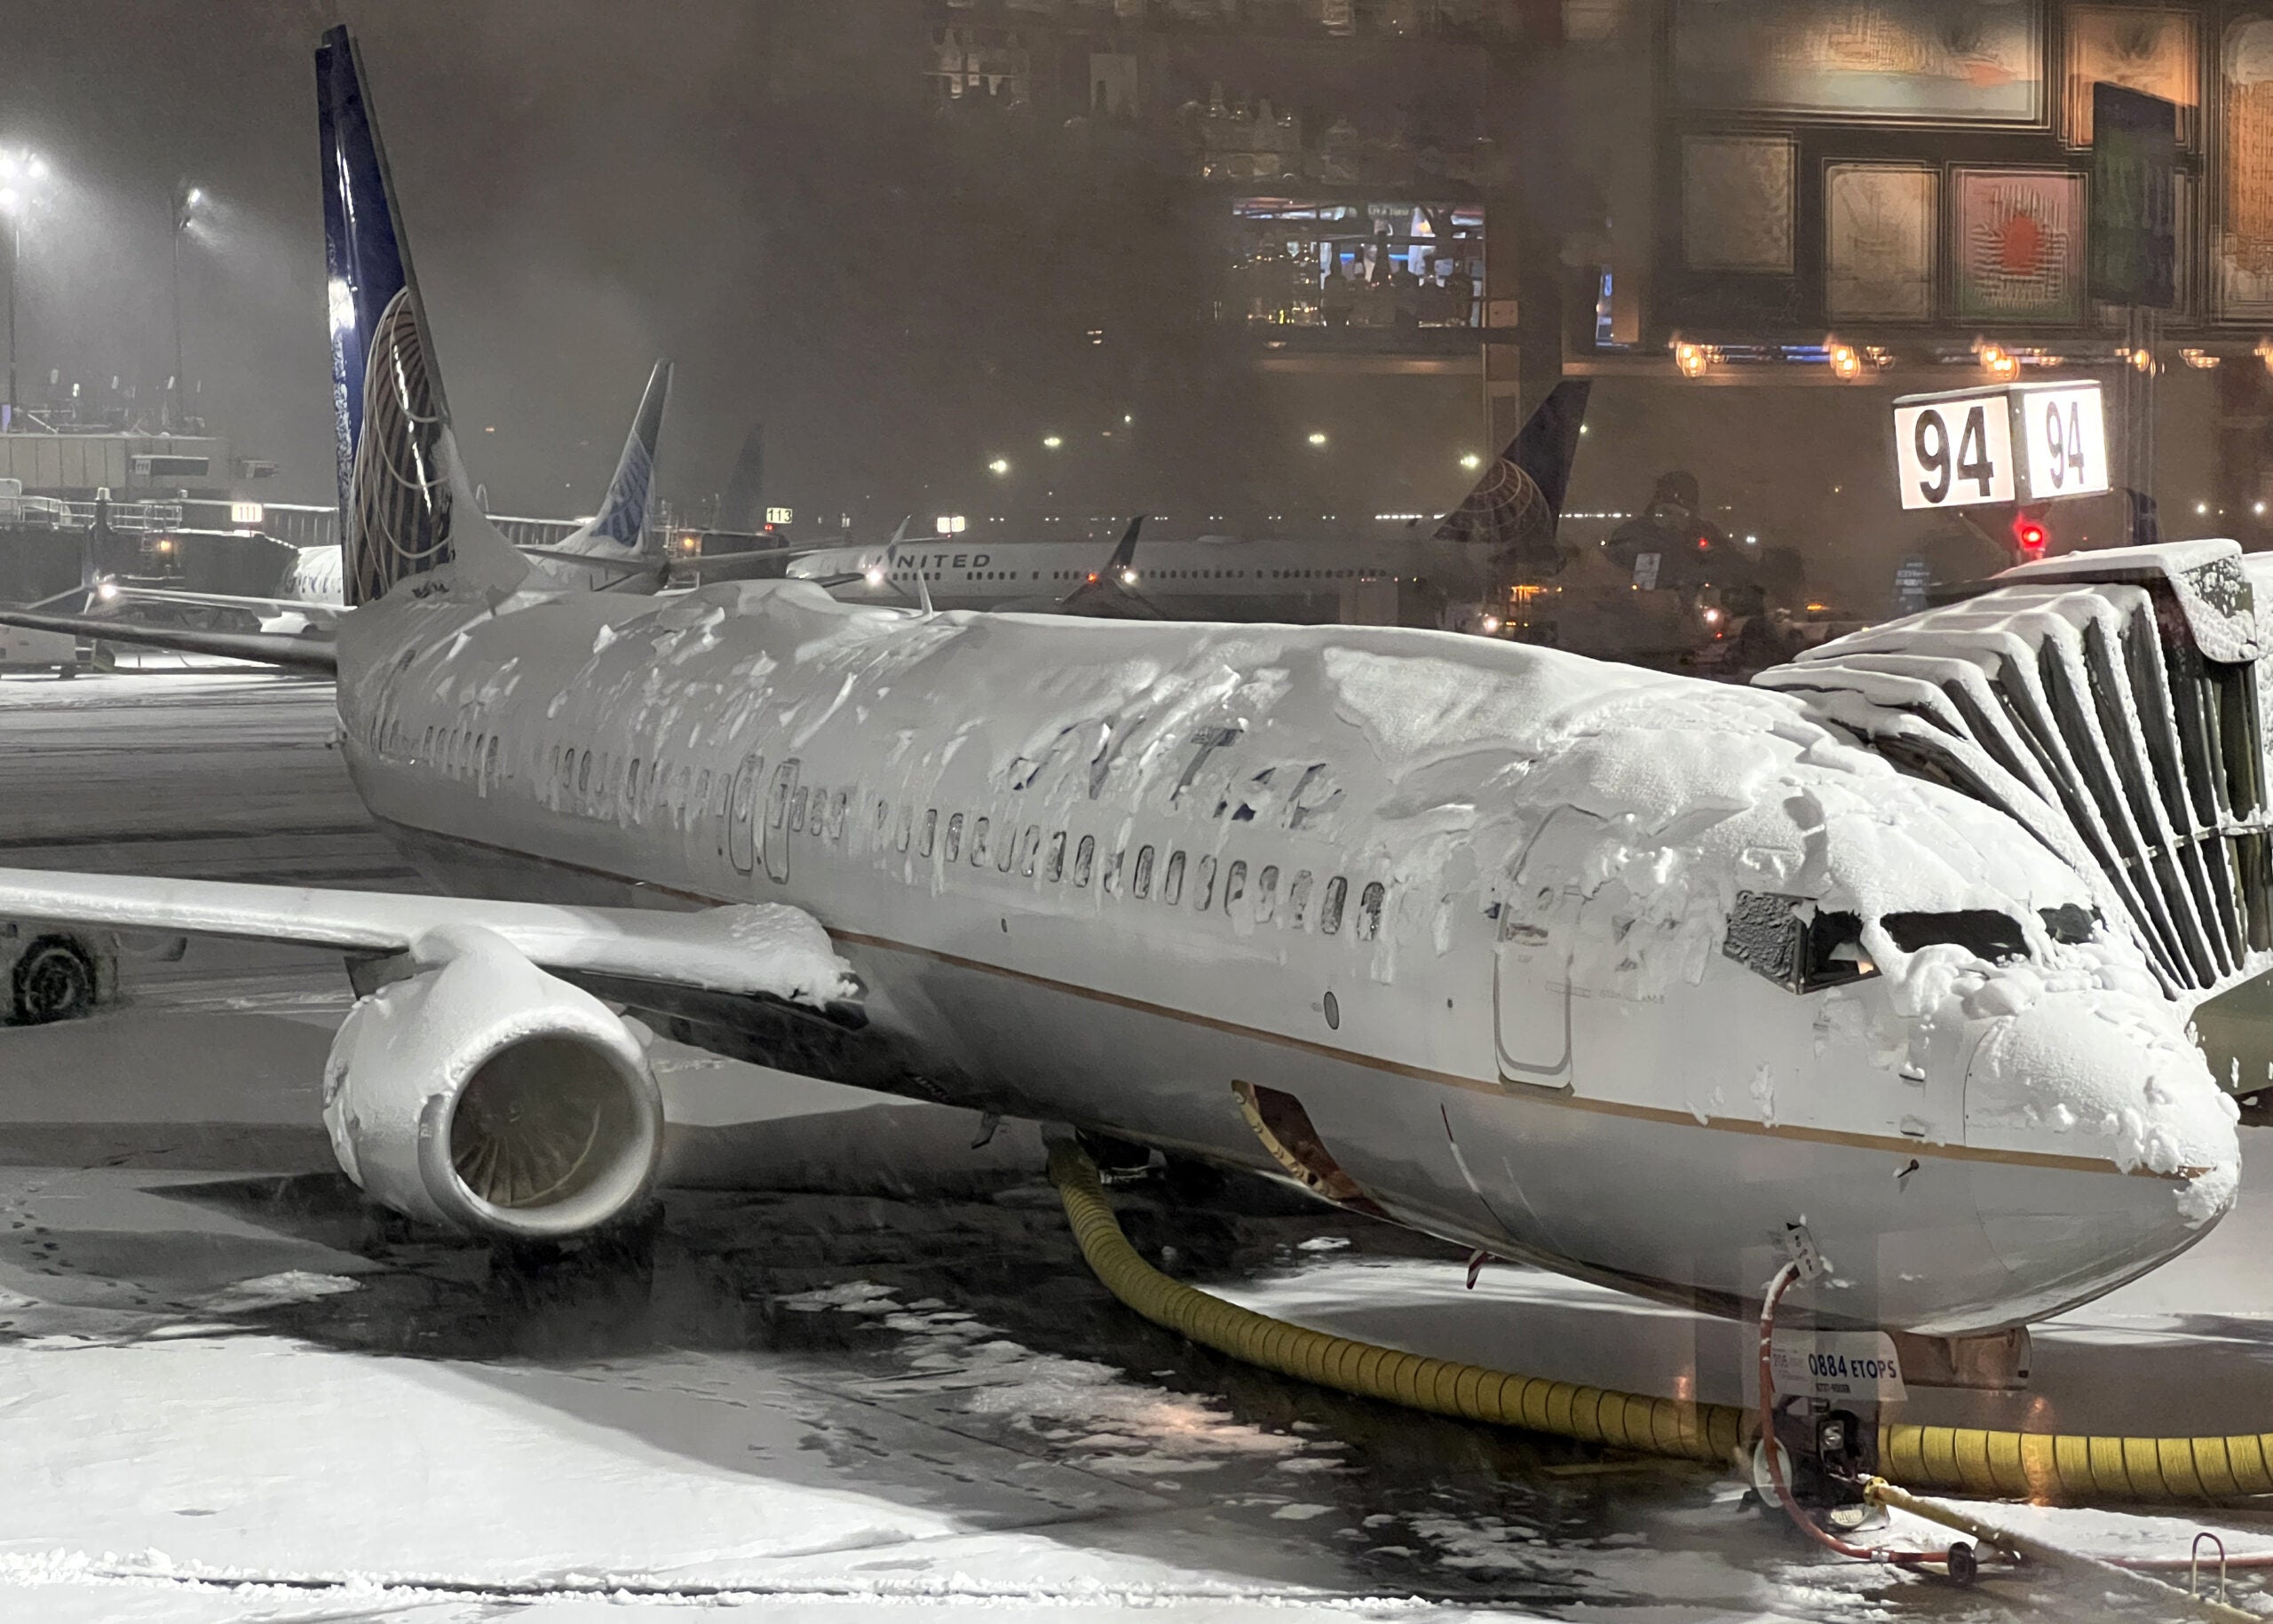 NEW JERSEY, USA - JANUARY 07: A United Airlines plane is seen as runway covered with snow at Newark Liberty International Airport on January 7, 2022 in New Jersey, United States as massive snow storm hits the east coast. (Photo by Tayfun Coskun/Anadolu Agency via Getty Images)